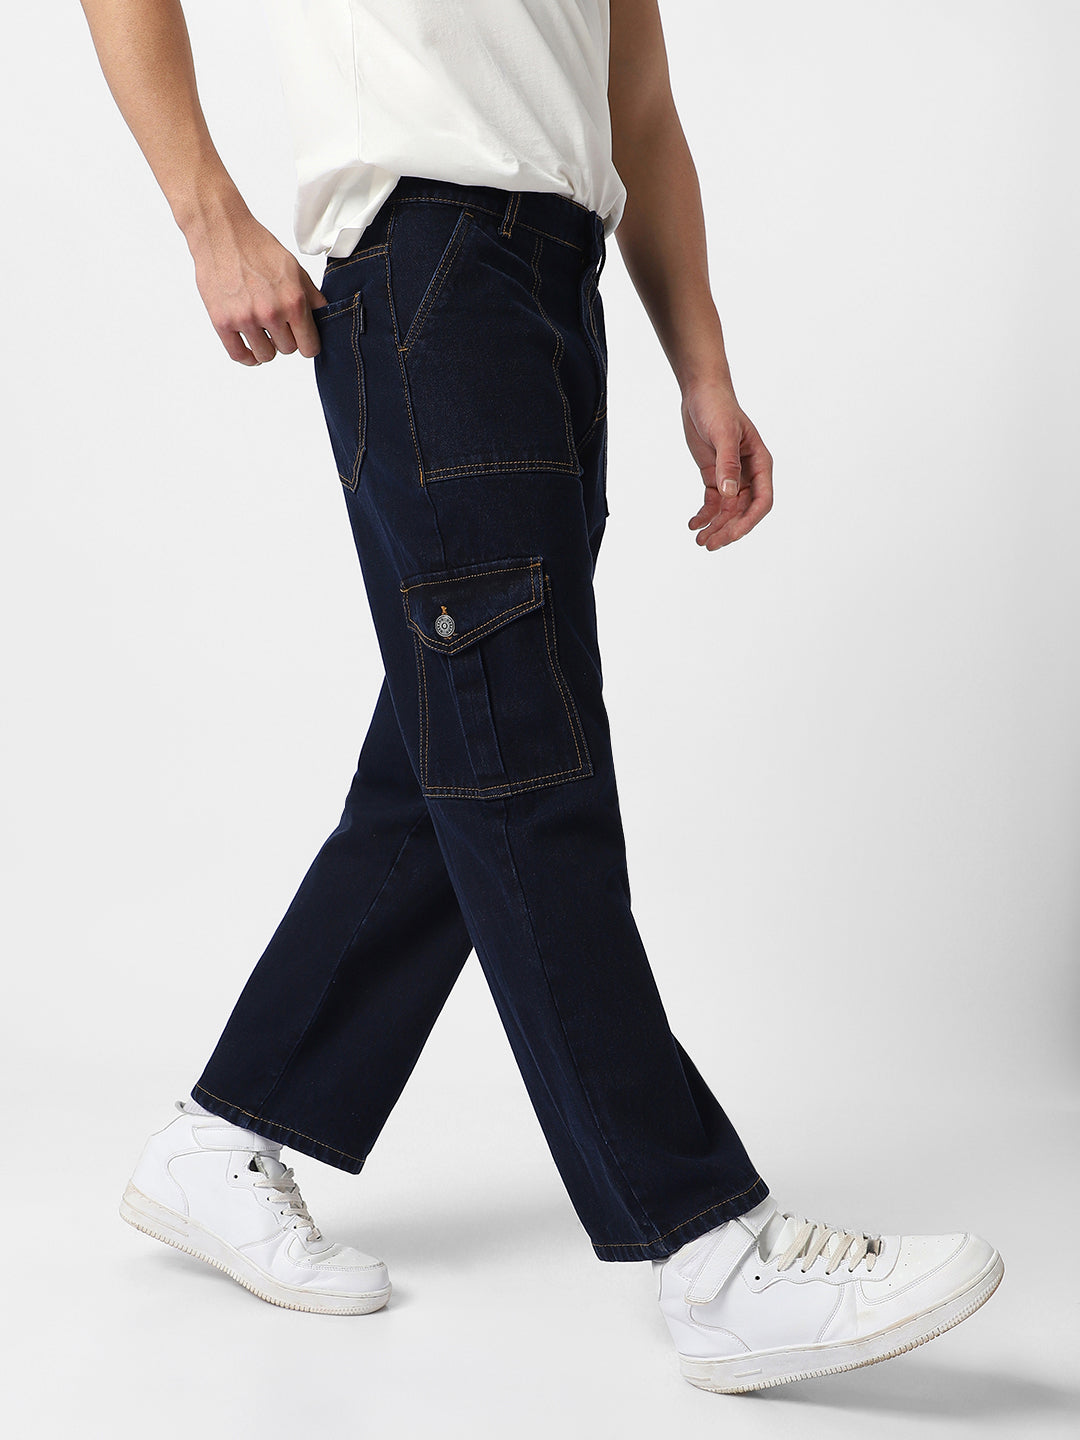 Men's Dark Blue Loose Fit Cargo Jeans with 6 Pockets Non-Stretchable